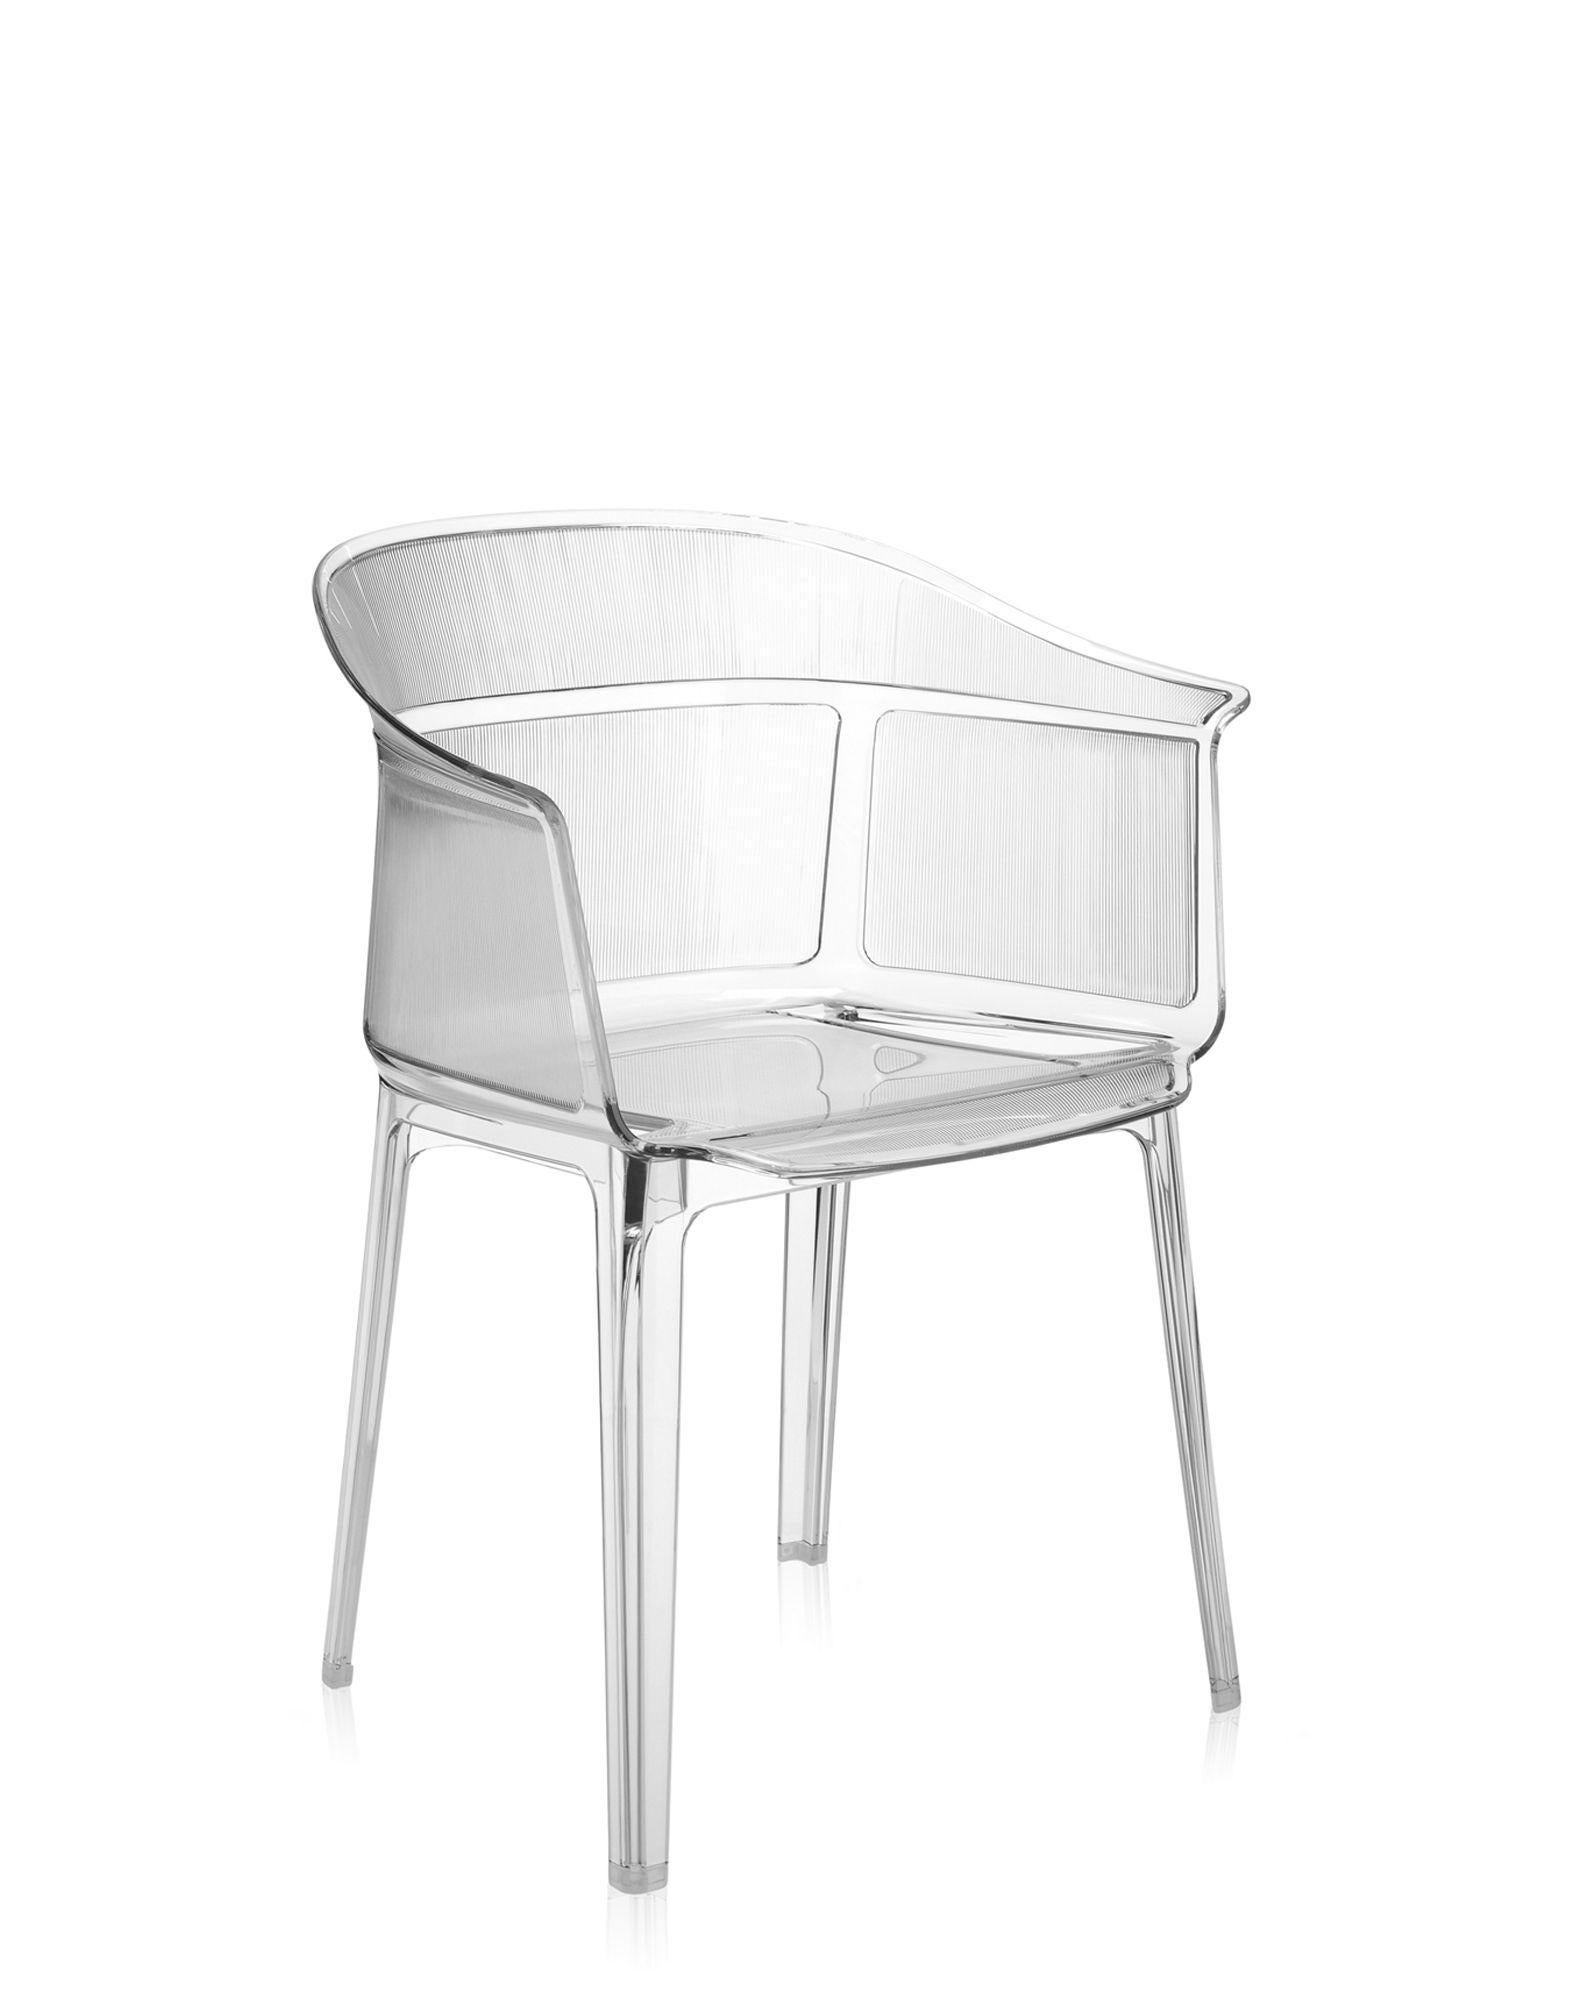 Papyrus is a remake of the archetypal antique rush chair, from a time when chair structures were decisive and strong. This chair combines a translucent support with a slender vertical pebbling, running along the entire outside of the rounded